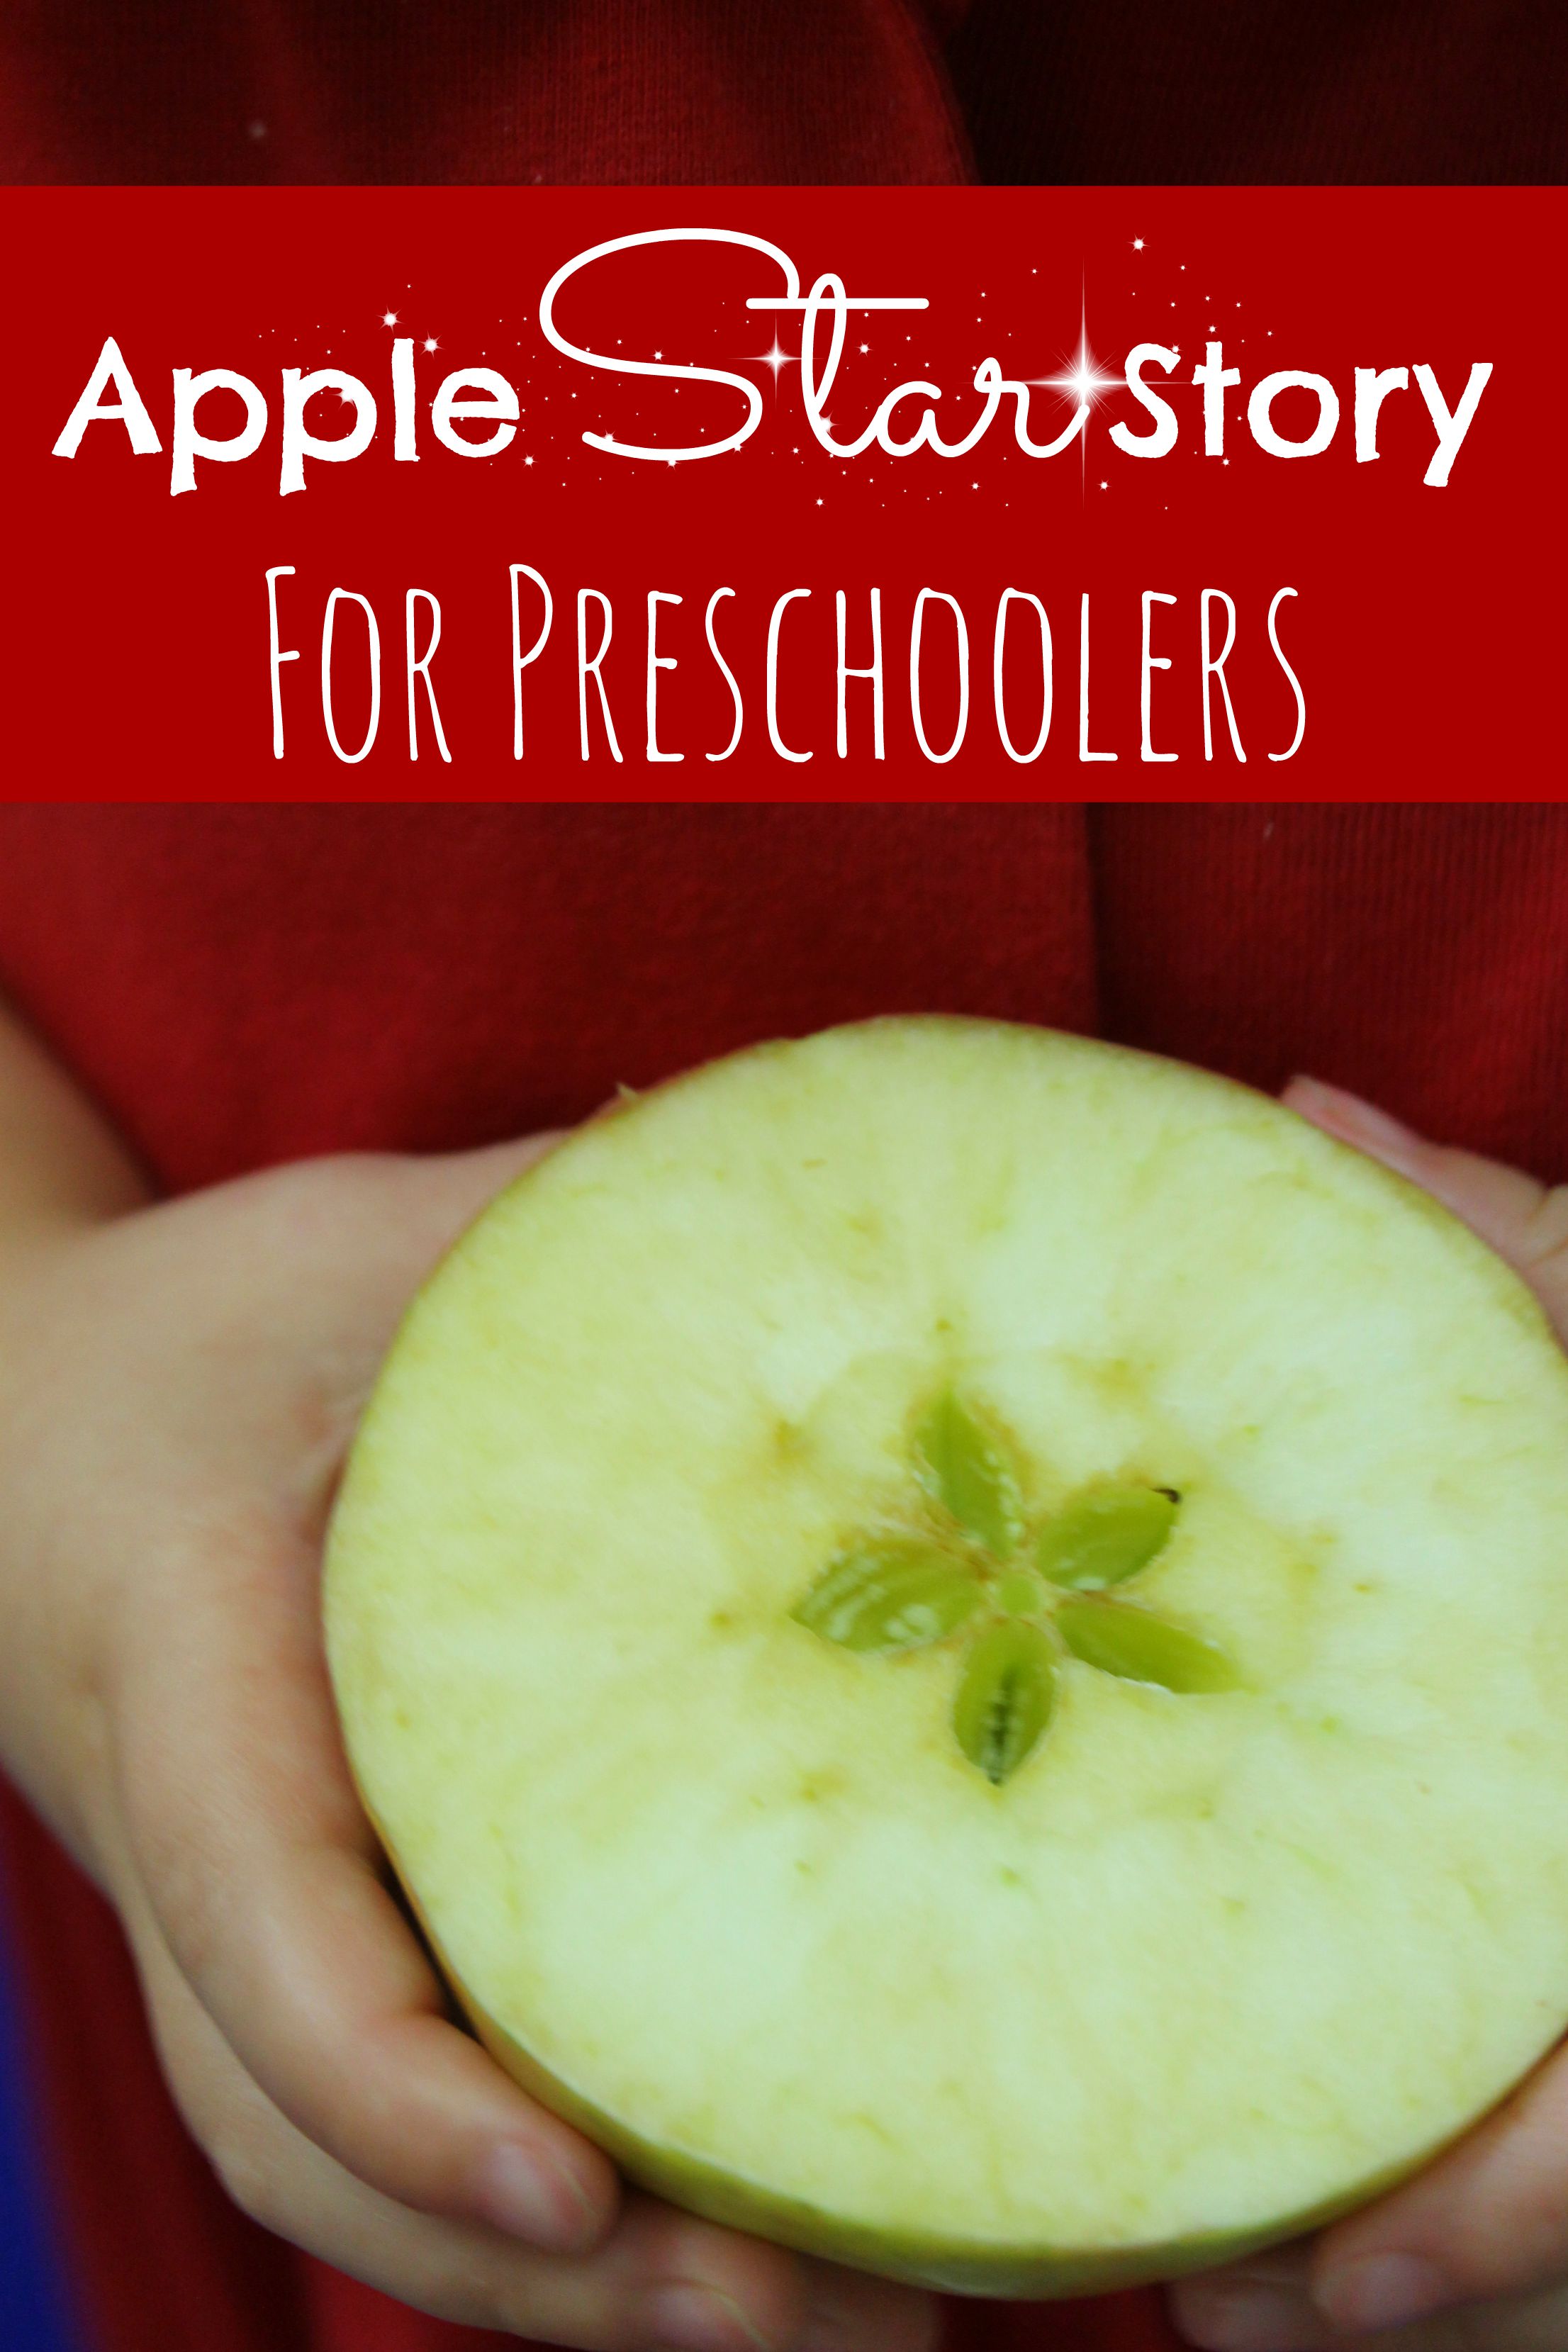 Apple STAR Story for Preschoolers - Happy Home Fairy